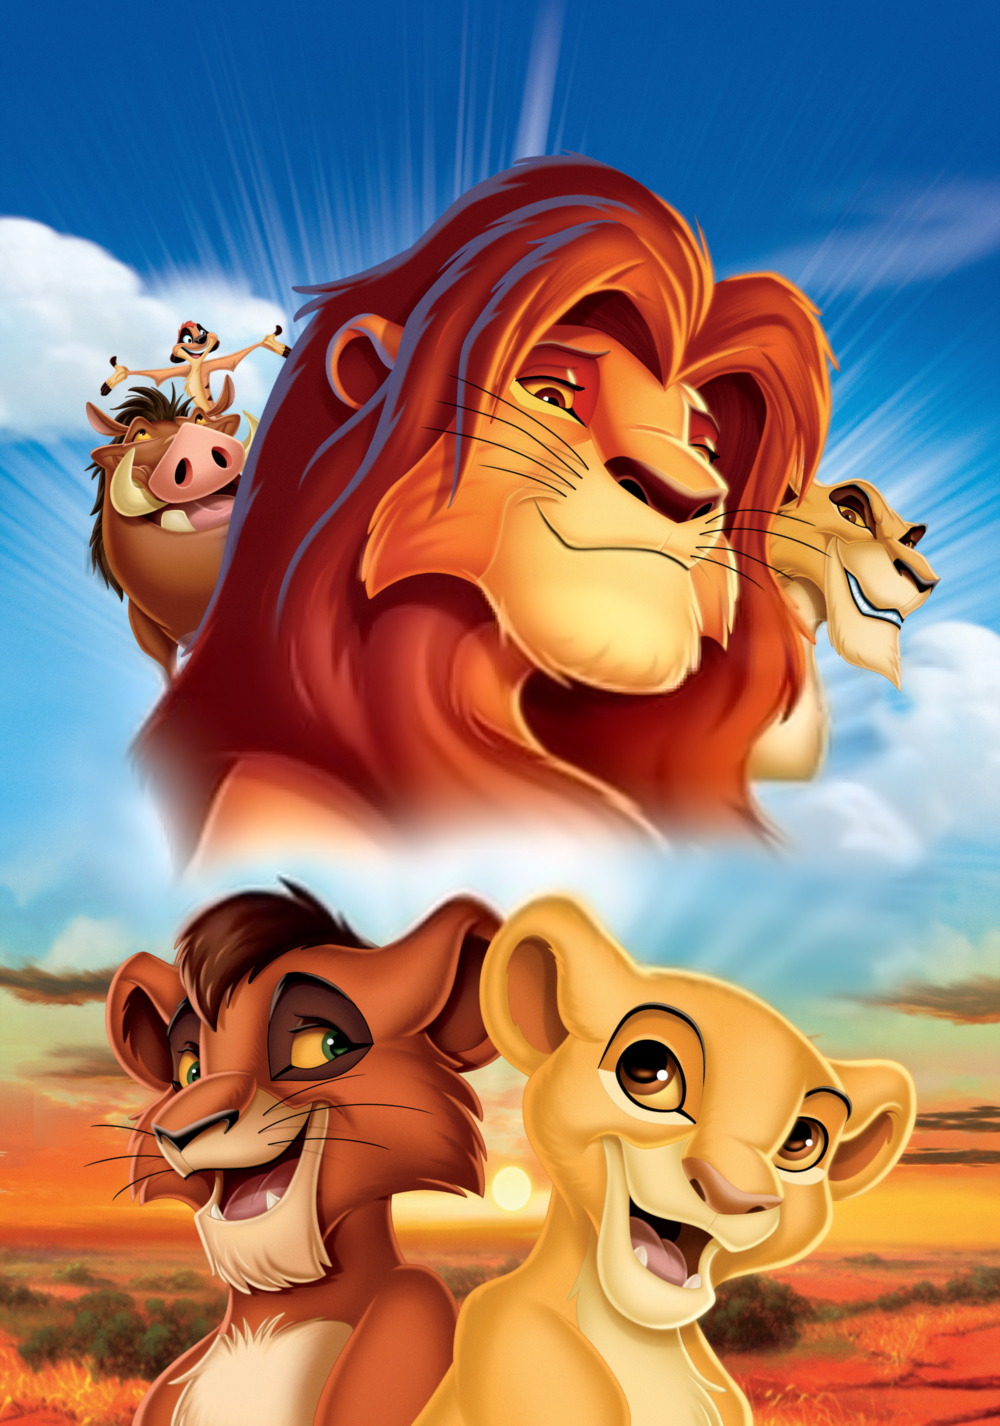 The Lion King 2: Simba's Pride Picture